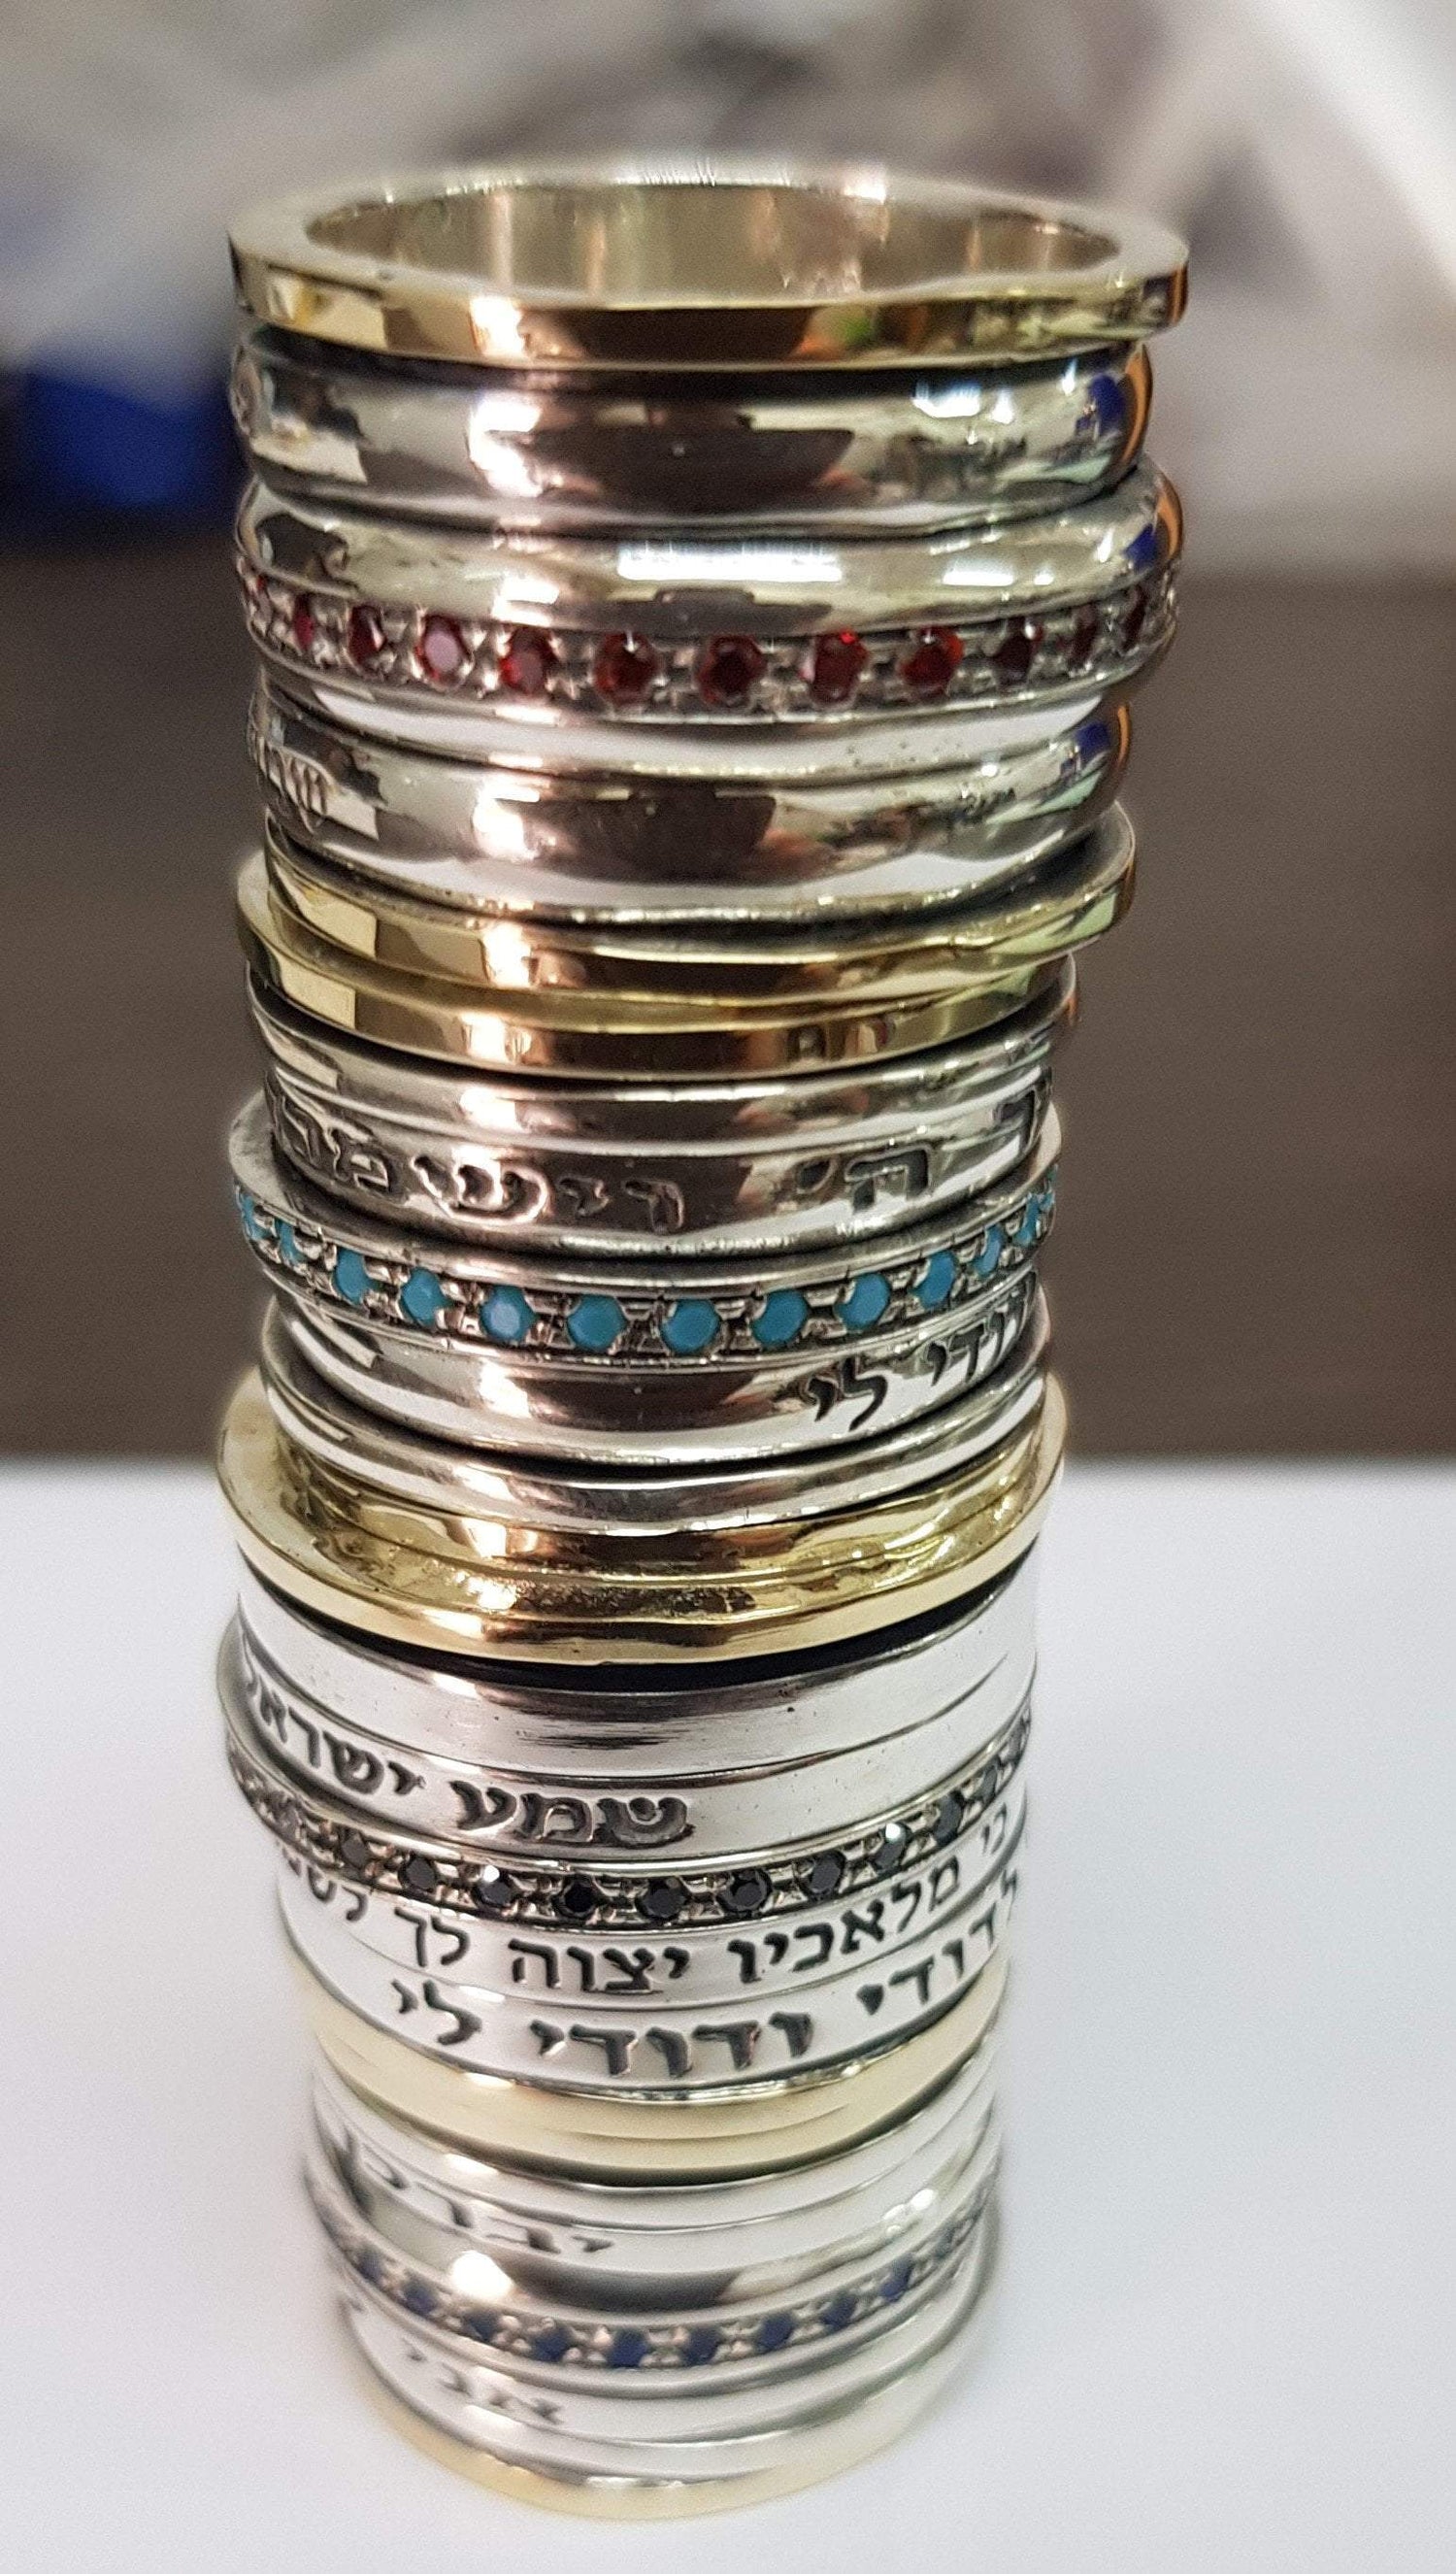 Bluenoemi Jewelry Hebrew Spinner ring for woman Inspirational bless jewelry Prayer & Poesie silver and gold set with blue zircons